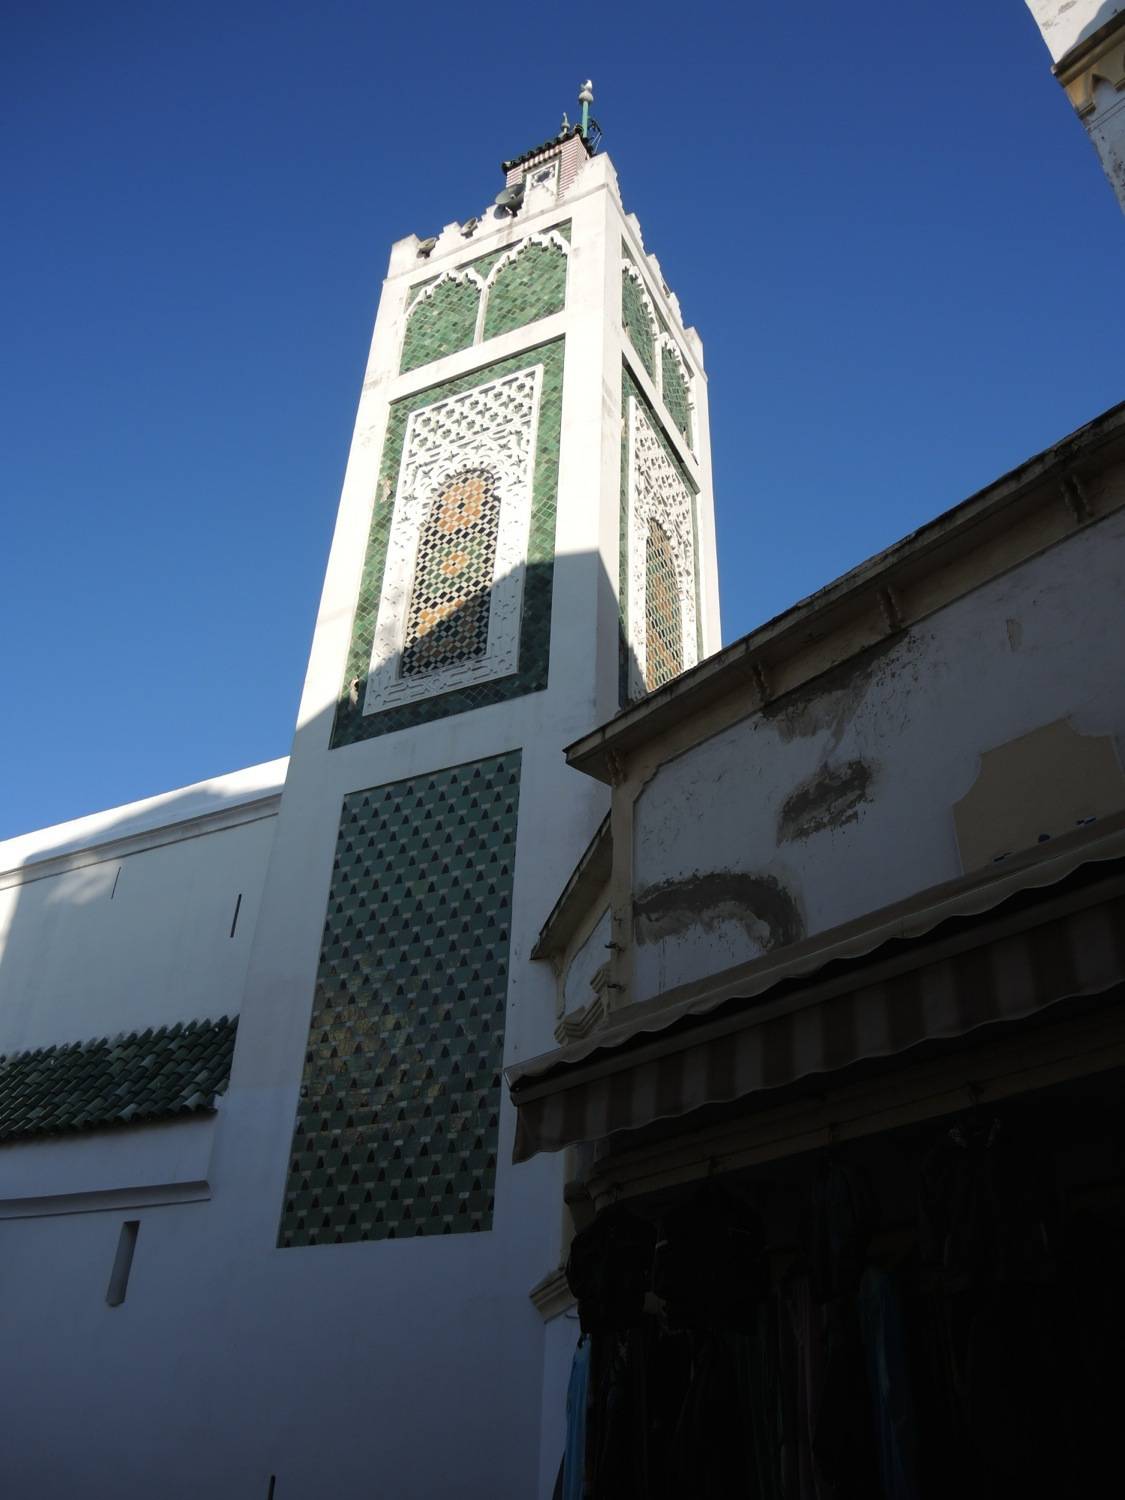 Exterior view of the minaret from street level